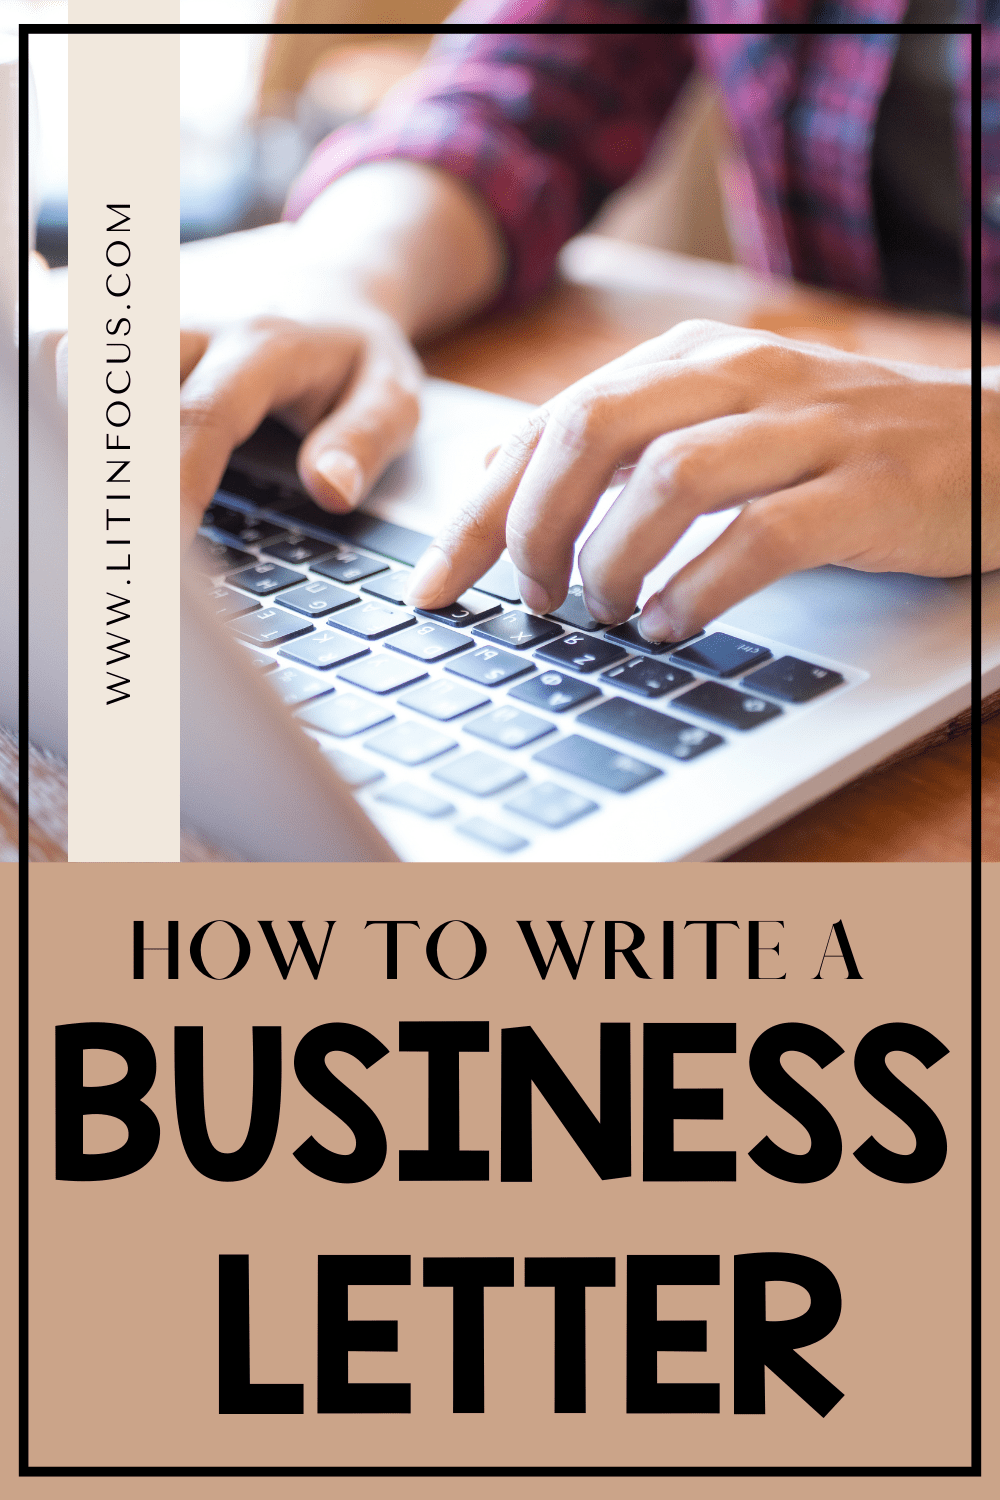 How to Write a Business Letter Lesson Plan and Activities for Students